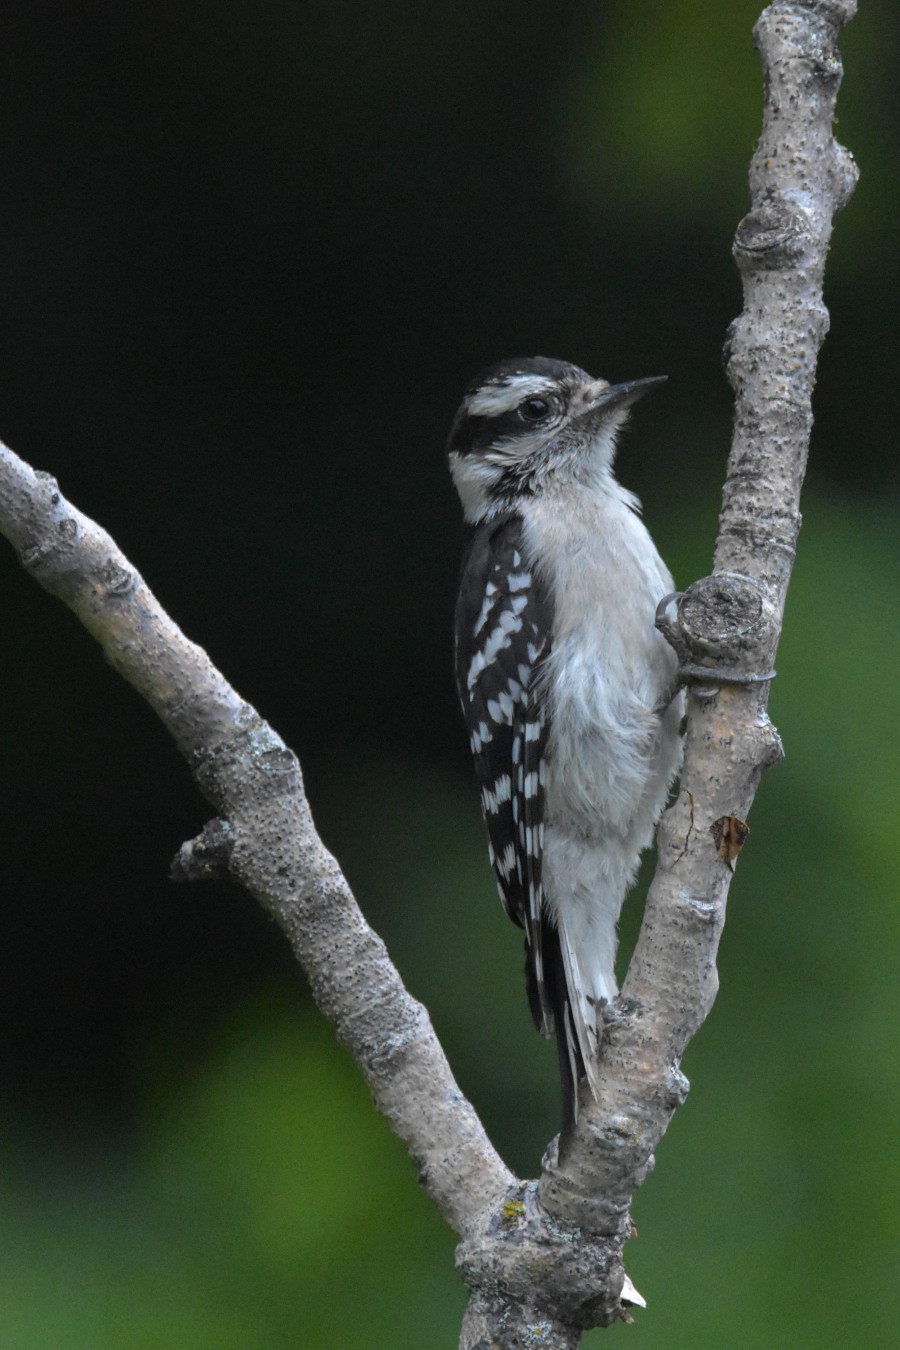 Downy Woodpecker pertched on a V shaped branch